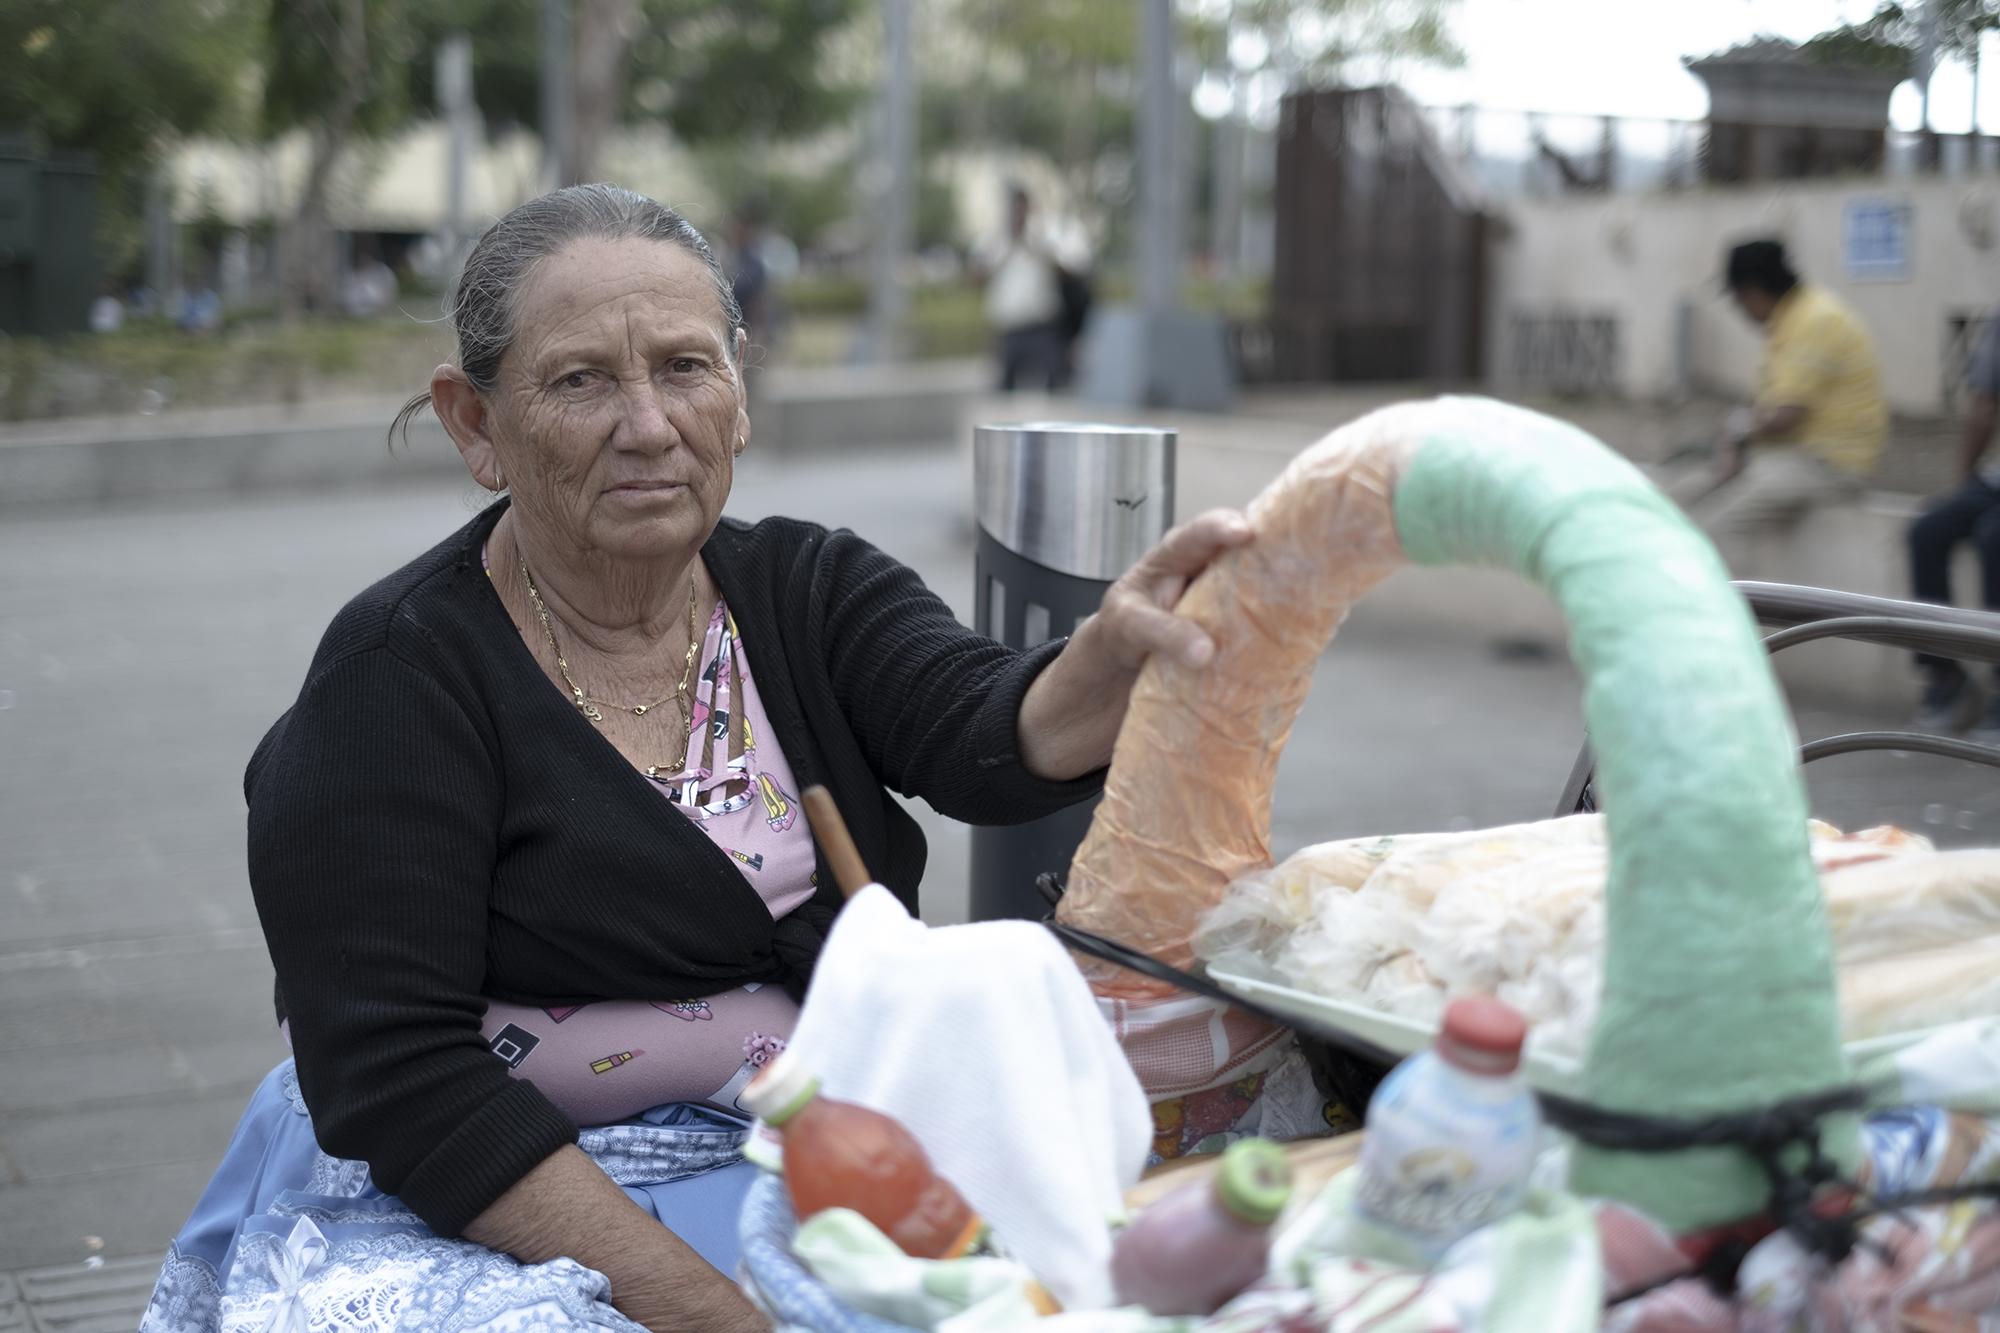 María Mejía, 64, lives in Amatepec, Soyapango. Her only source of income is selling panes mata niños, popular street breads topped with cabbage, mortadella, and salsa. “I sell $20 of product per day, and take home about $5 after overhead costs,” she said. “It’s complicated with the coronavirus, but if I stay home, I’ll starve.”